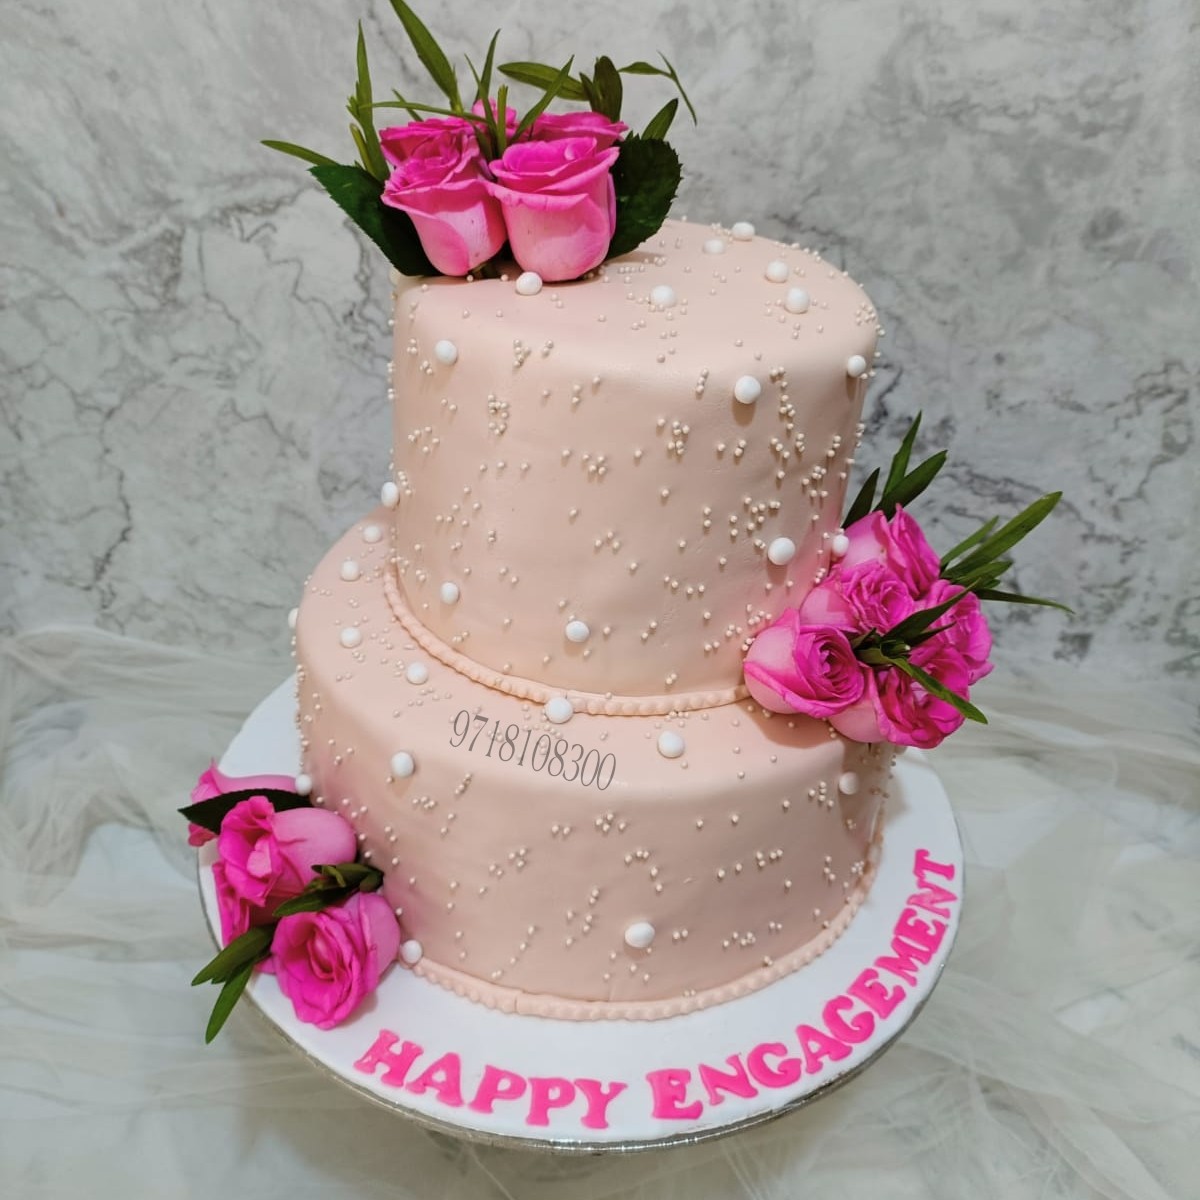 3 tier Wedding Anniversary Cake (5 Kg), Fondant Cakes Delivery in Ahmedabad  – SendGifts Ahmedabad